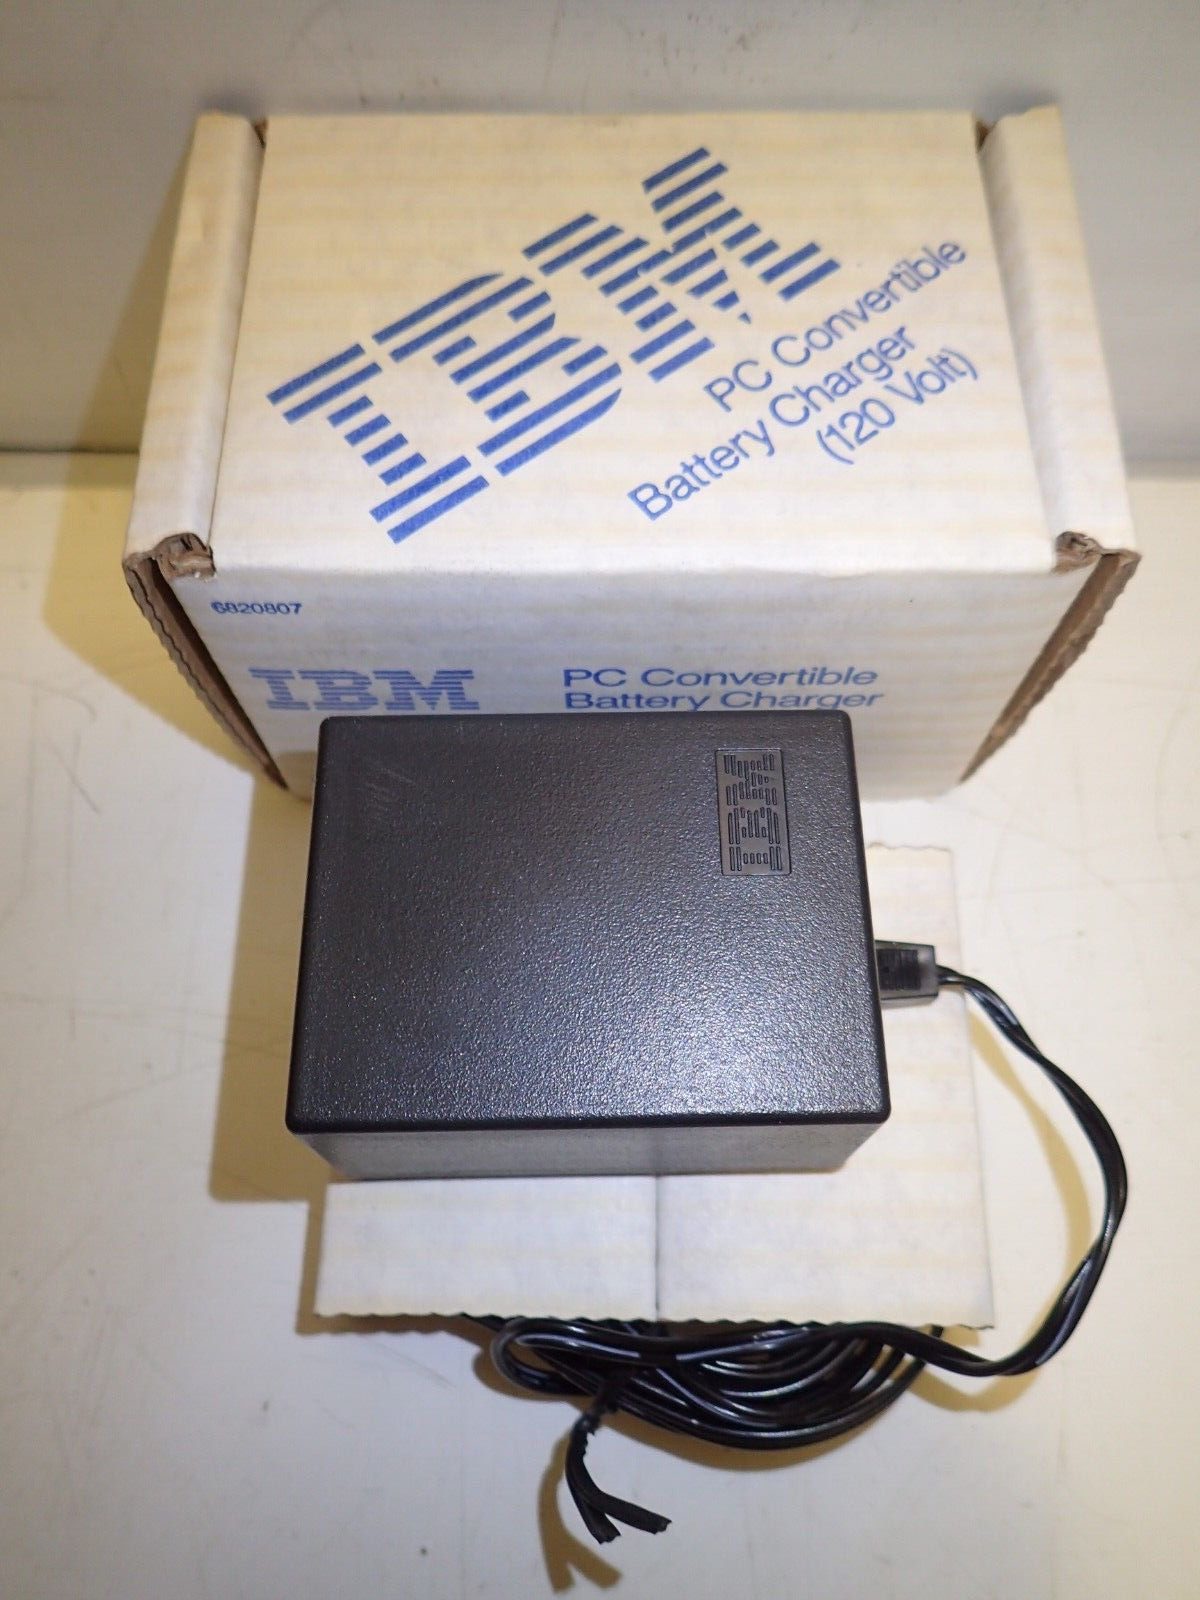 New Vintage IBM Power Supply P/N 2684292 Adapter 15V DC for 5140 PC Convertible